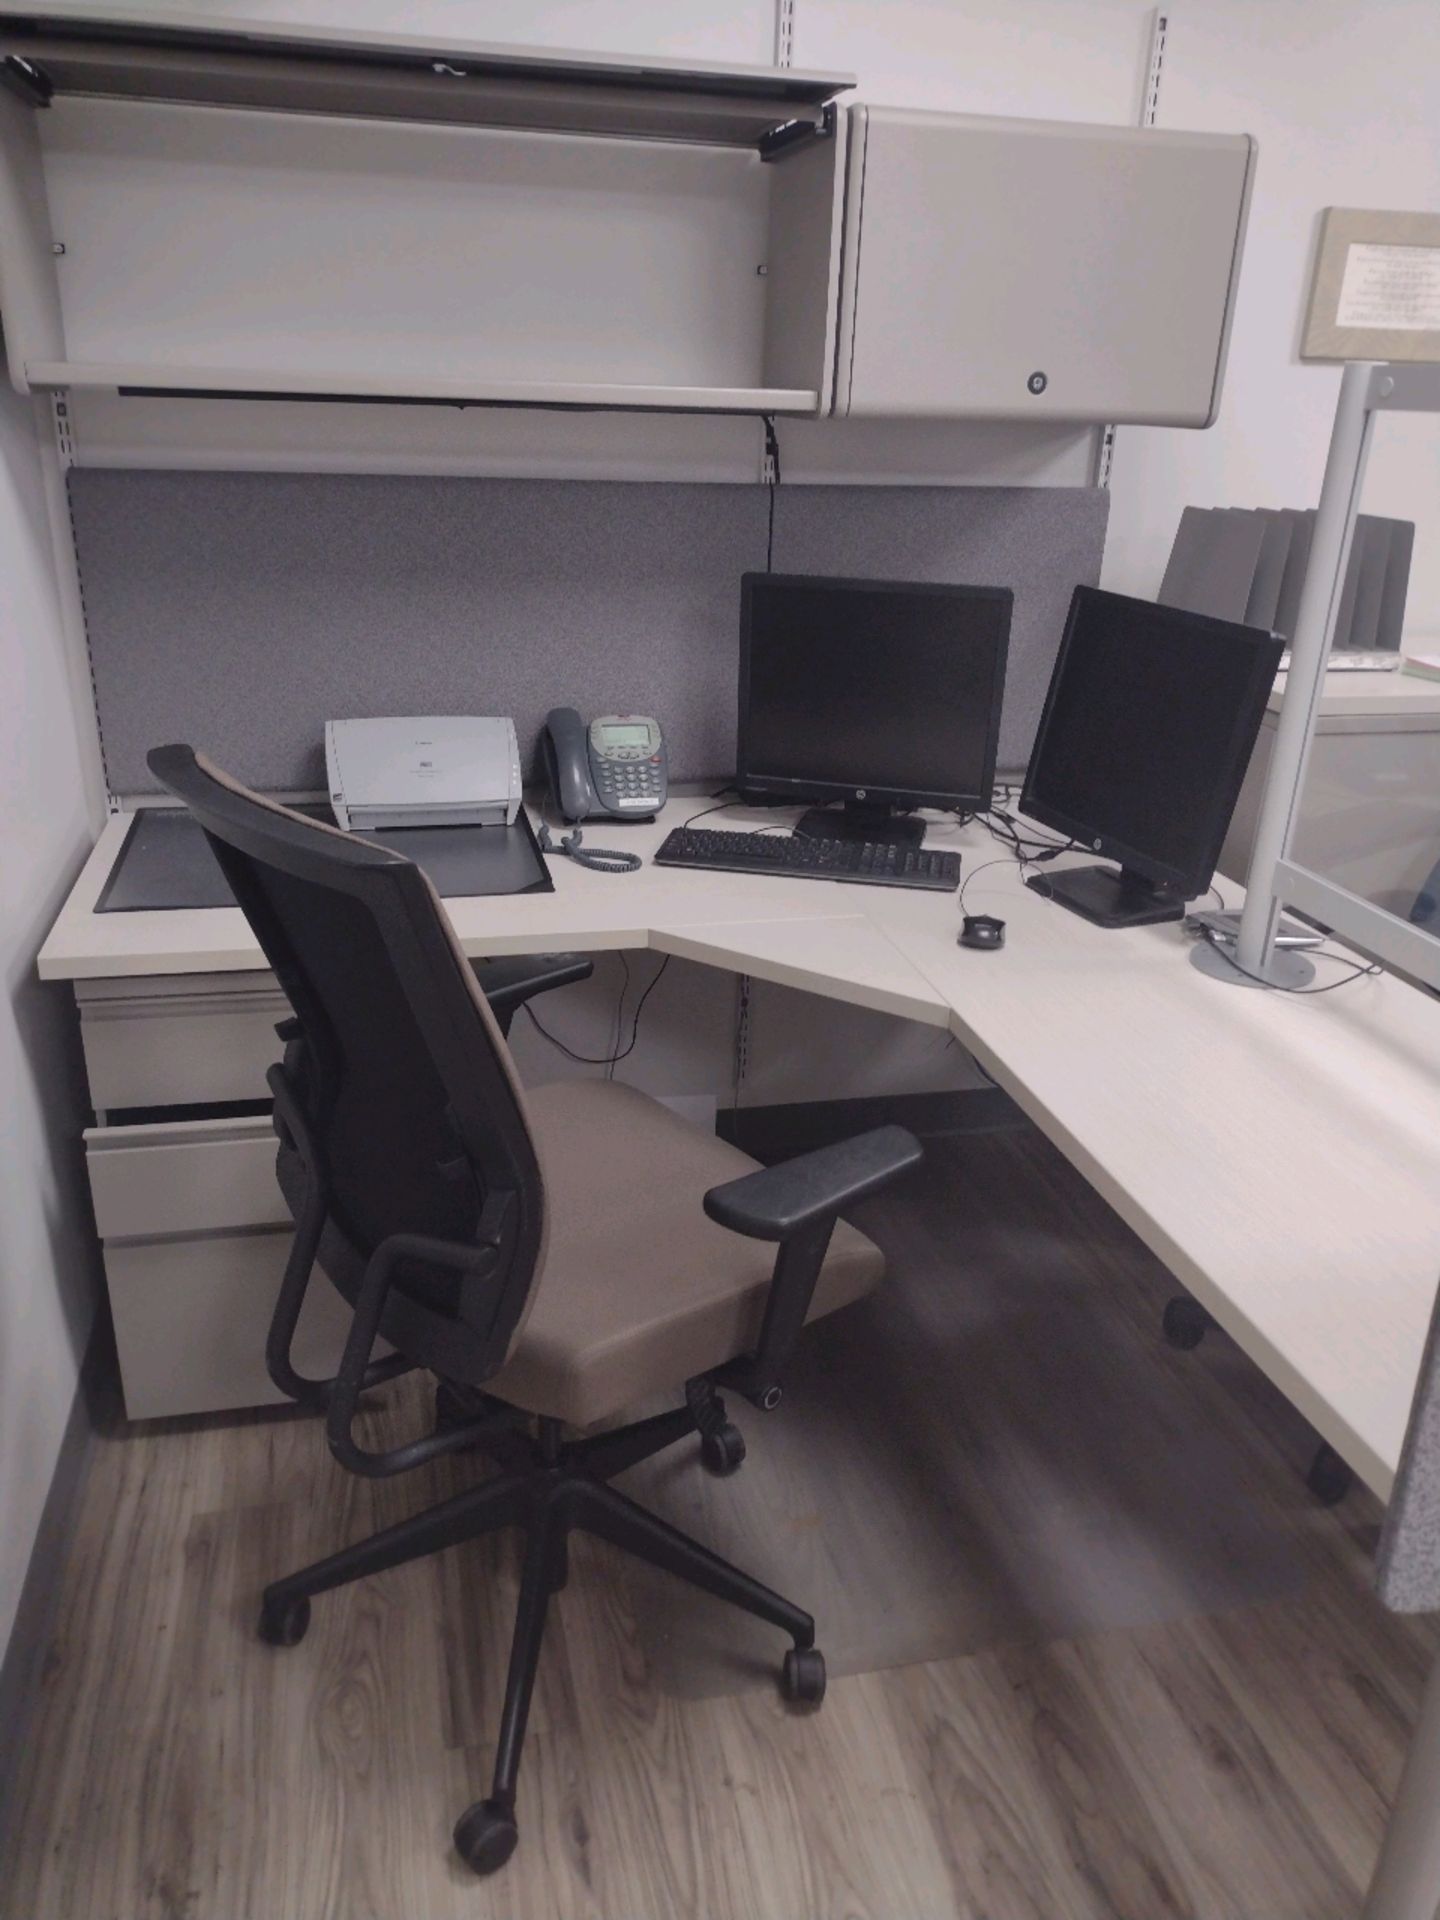 OFFICE SUITE INCLUDE: 6 WORKSTATION CUBICLE, LEXMARK PRINTER, HP PRINTER, 3- CANON DR-C130 - Image 6 of 12